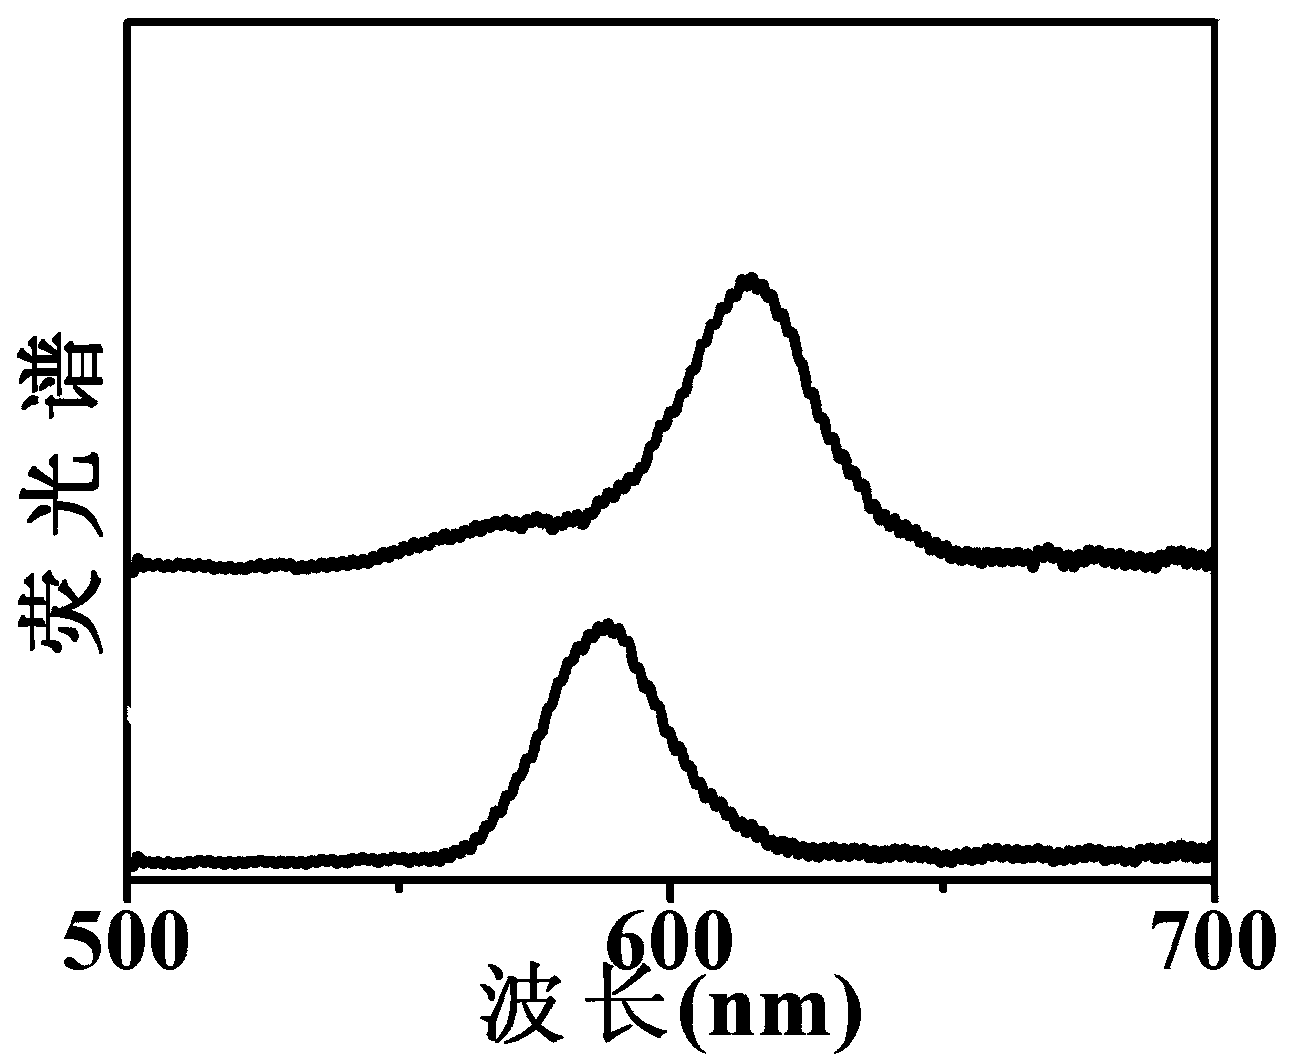 Preparation method for synthesizing CdSe/CdS core-shell structure quantum dots through one step